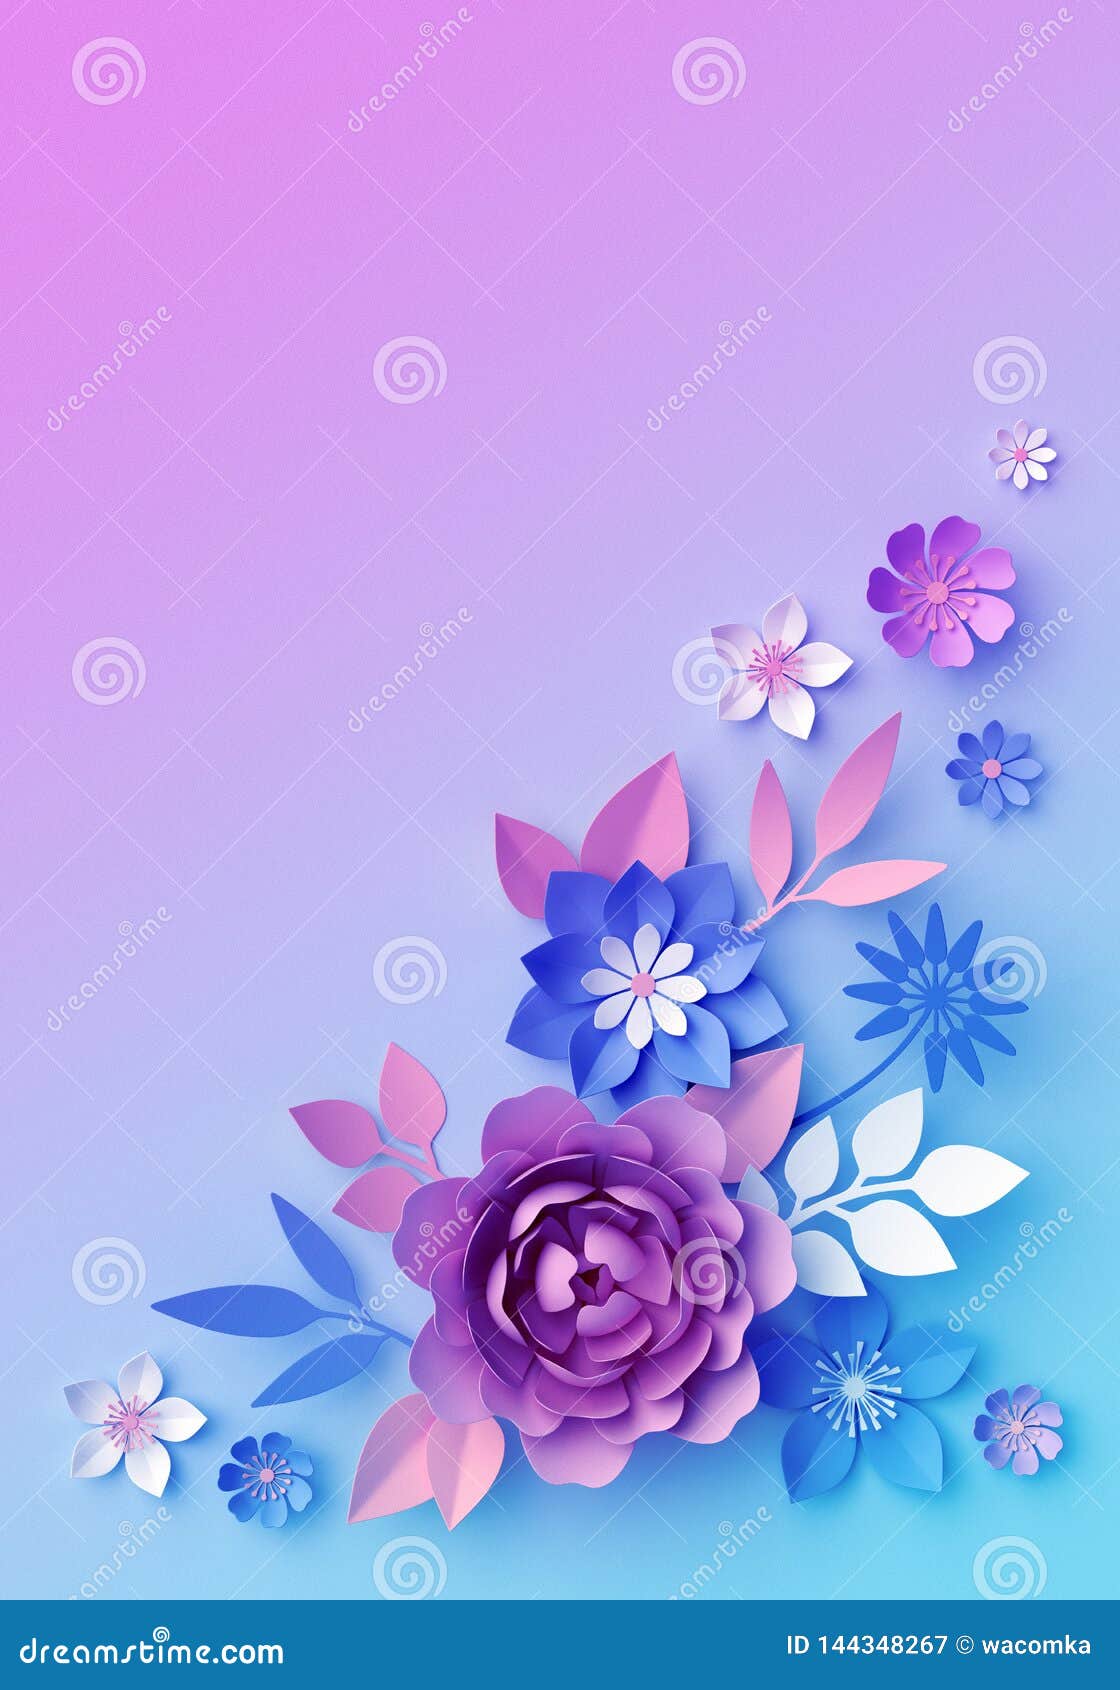 3d Pink Blue Neon Paper Flowers, Pastel Color Botanical Wallpaper, Isolated  Corner Design Element, Clip Art, Greeting Card Stock Illustration -  Illustration of birthday, holiday: 144348267